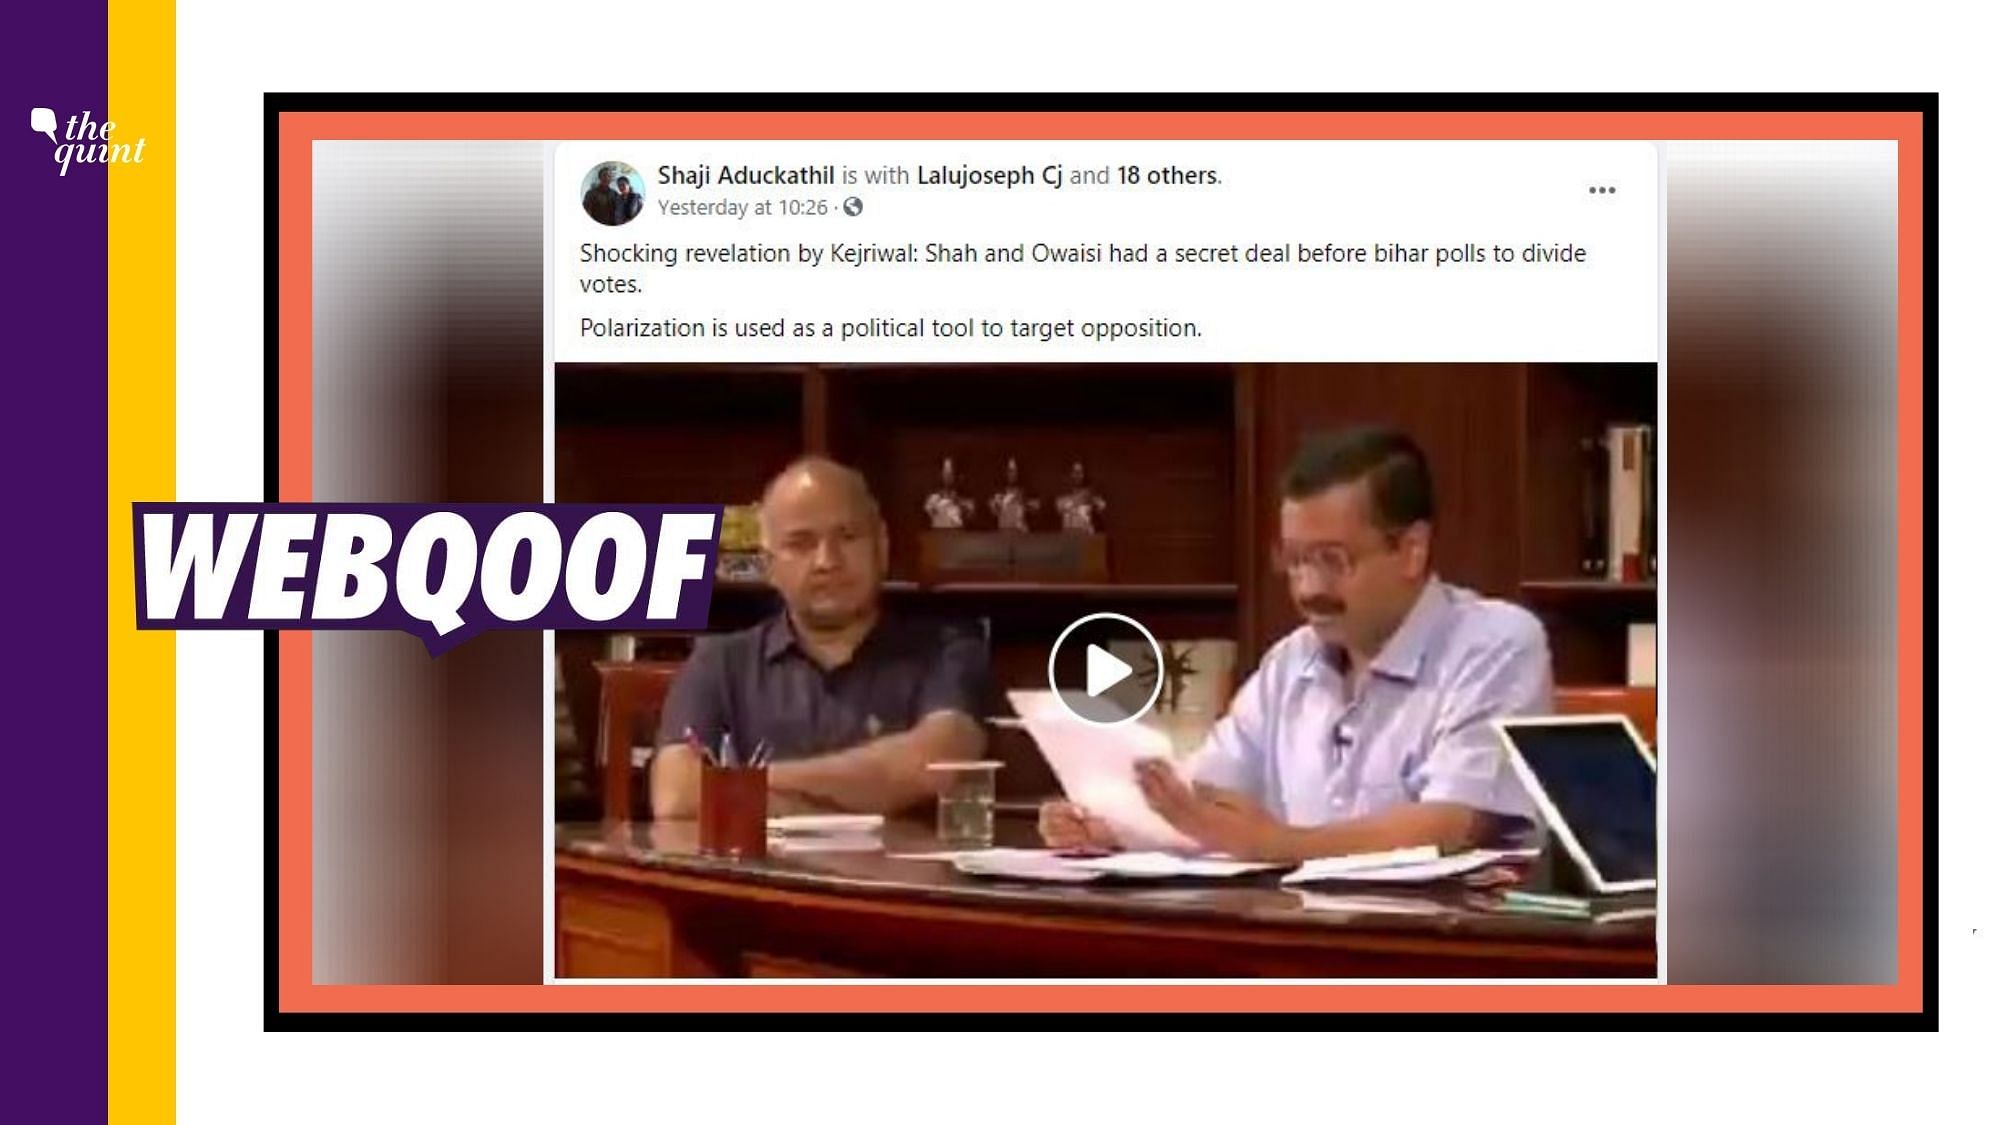 A clip of Delhi Chief Minister Arvind Kejriwal reading a letter alleging that Amit Shah and AIMIM’s Akbaruddin Owaisi stuck a “secret deal” ahead of the Bihar polls is doing the rounds on social media.